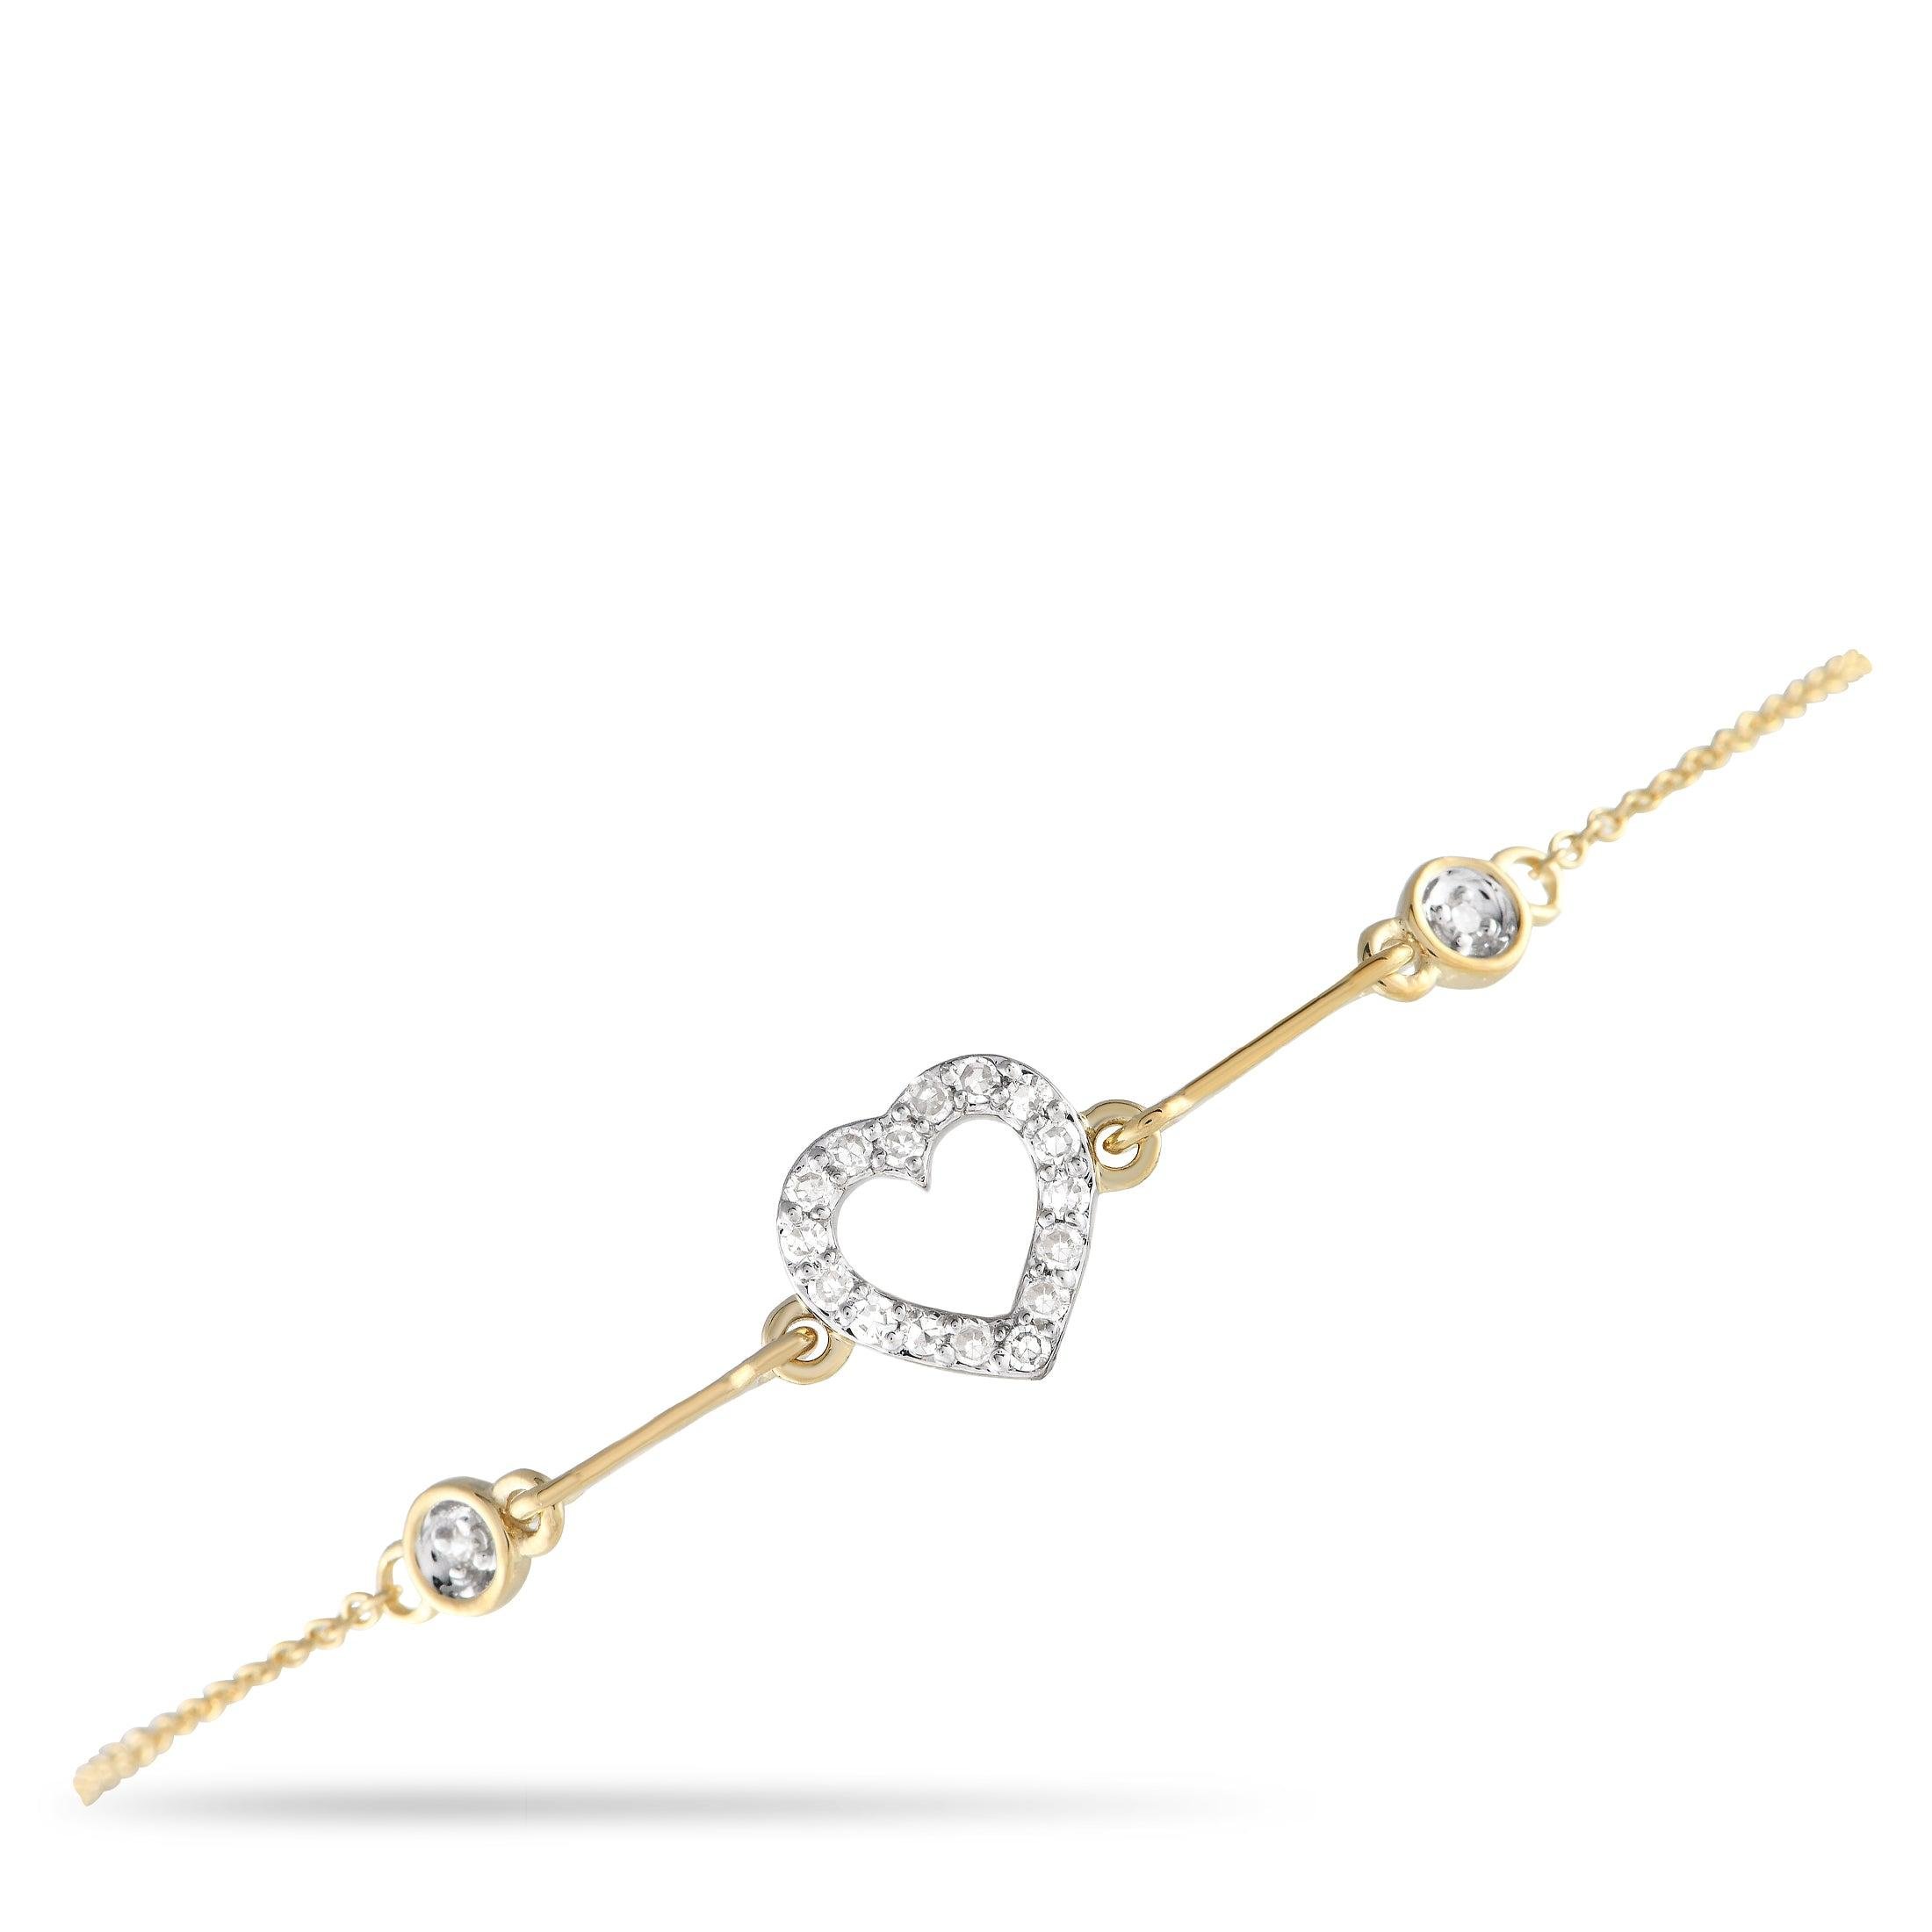 LB Exclusive 14K Yellow Gold 0.10ct Diamond Heart Bracelet BR09663-Y by NON BRANDED